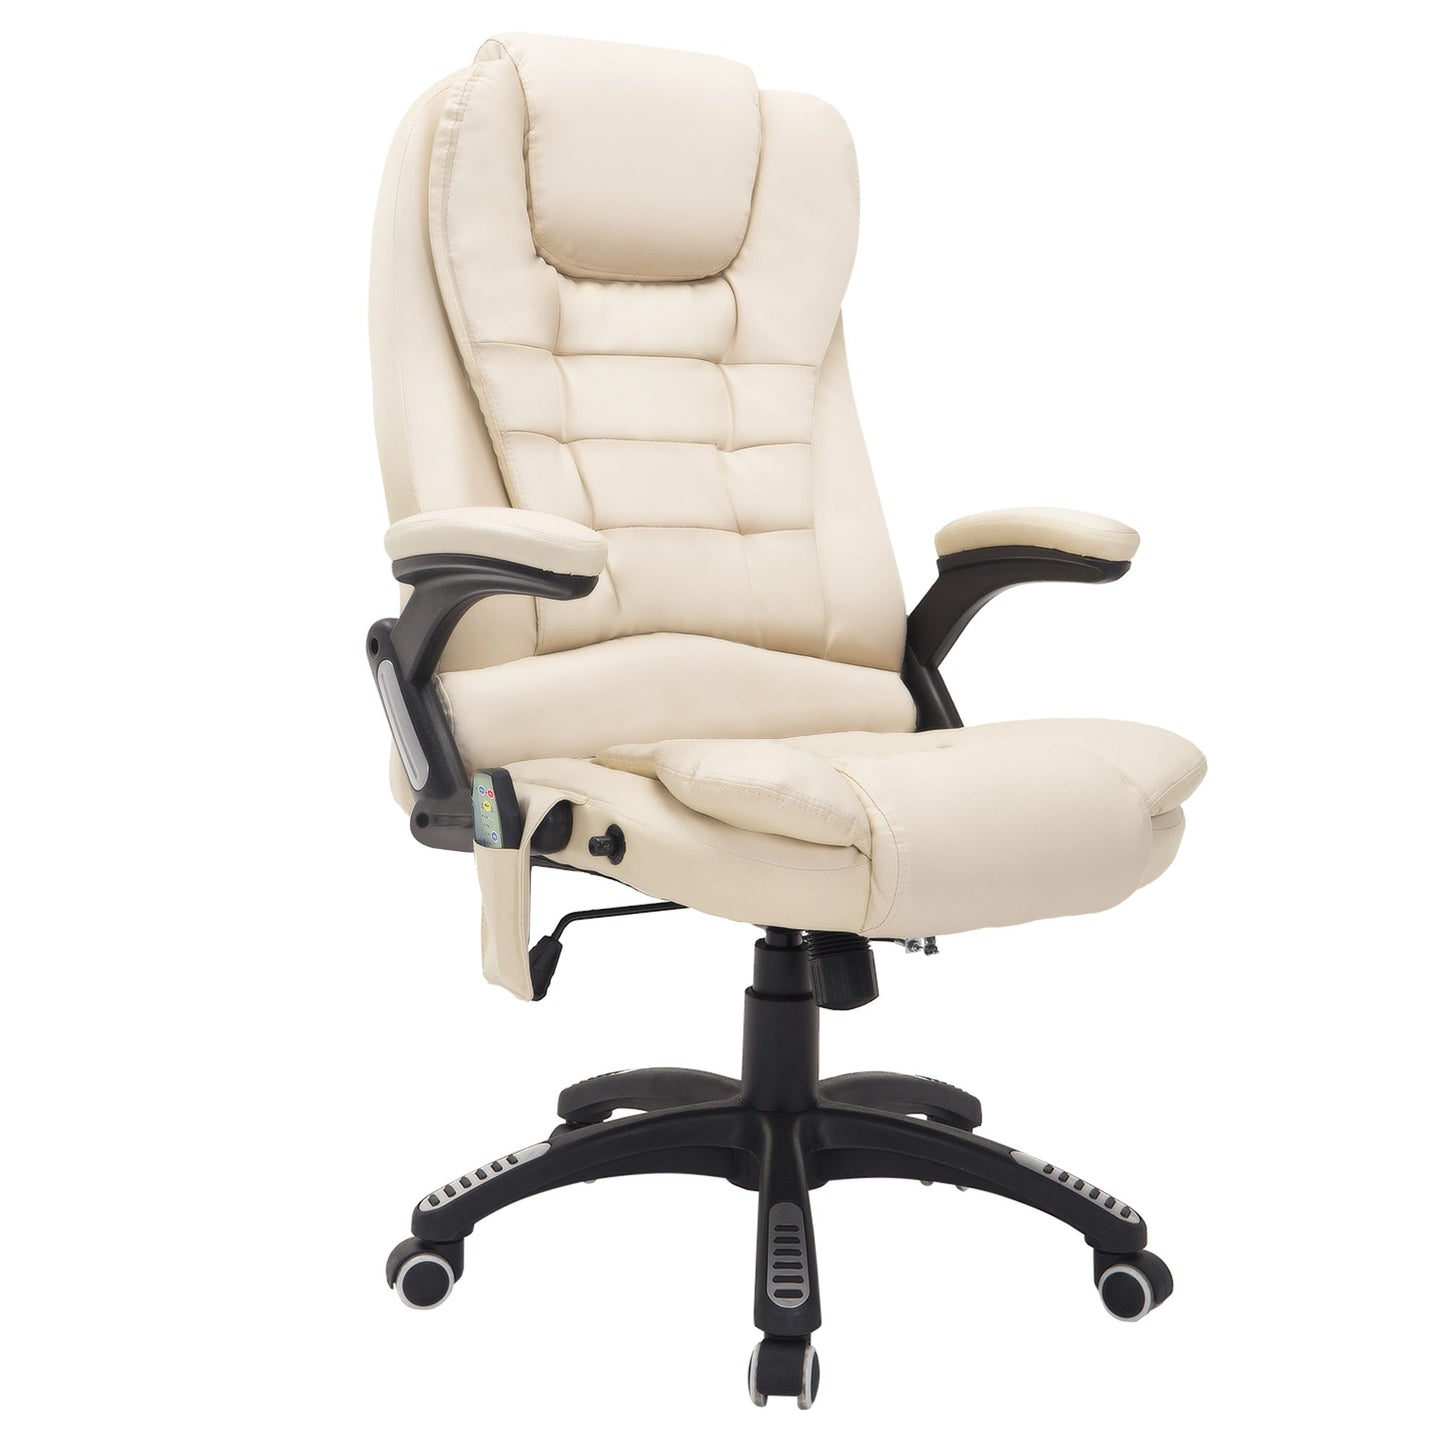 Massegoing office armchair with eco-leather heating, beige, 62x68x111-121cm